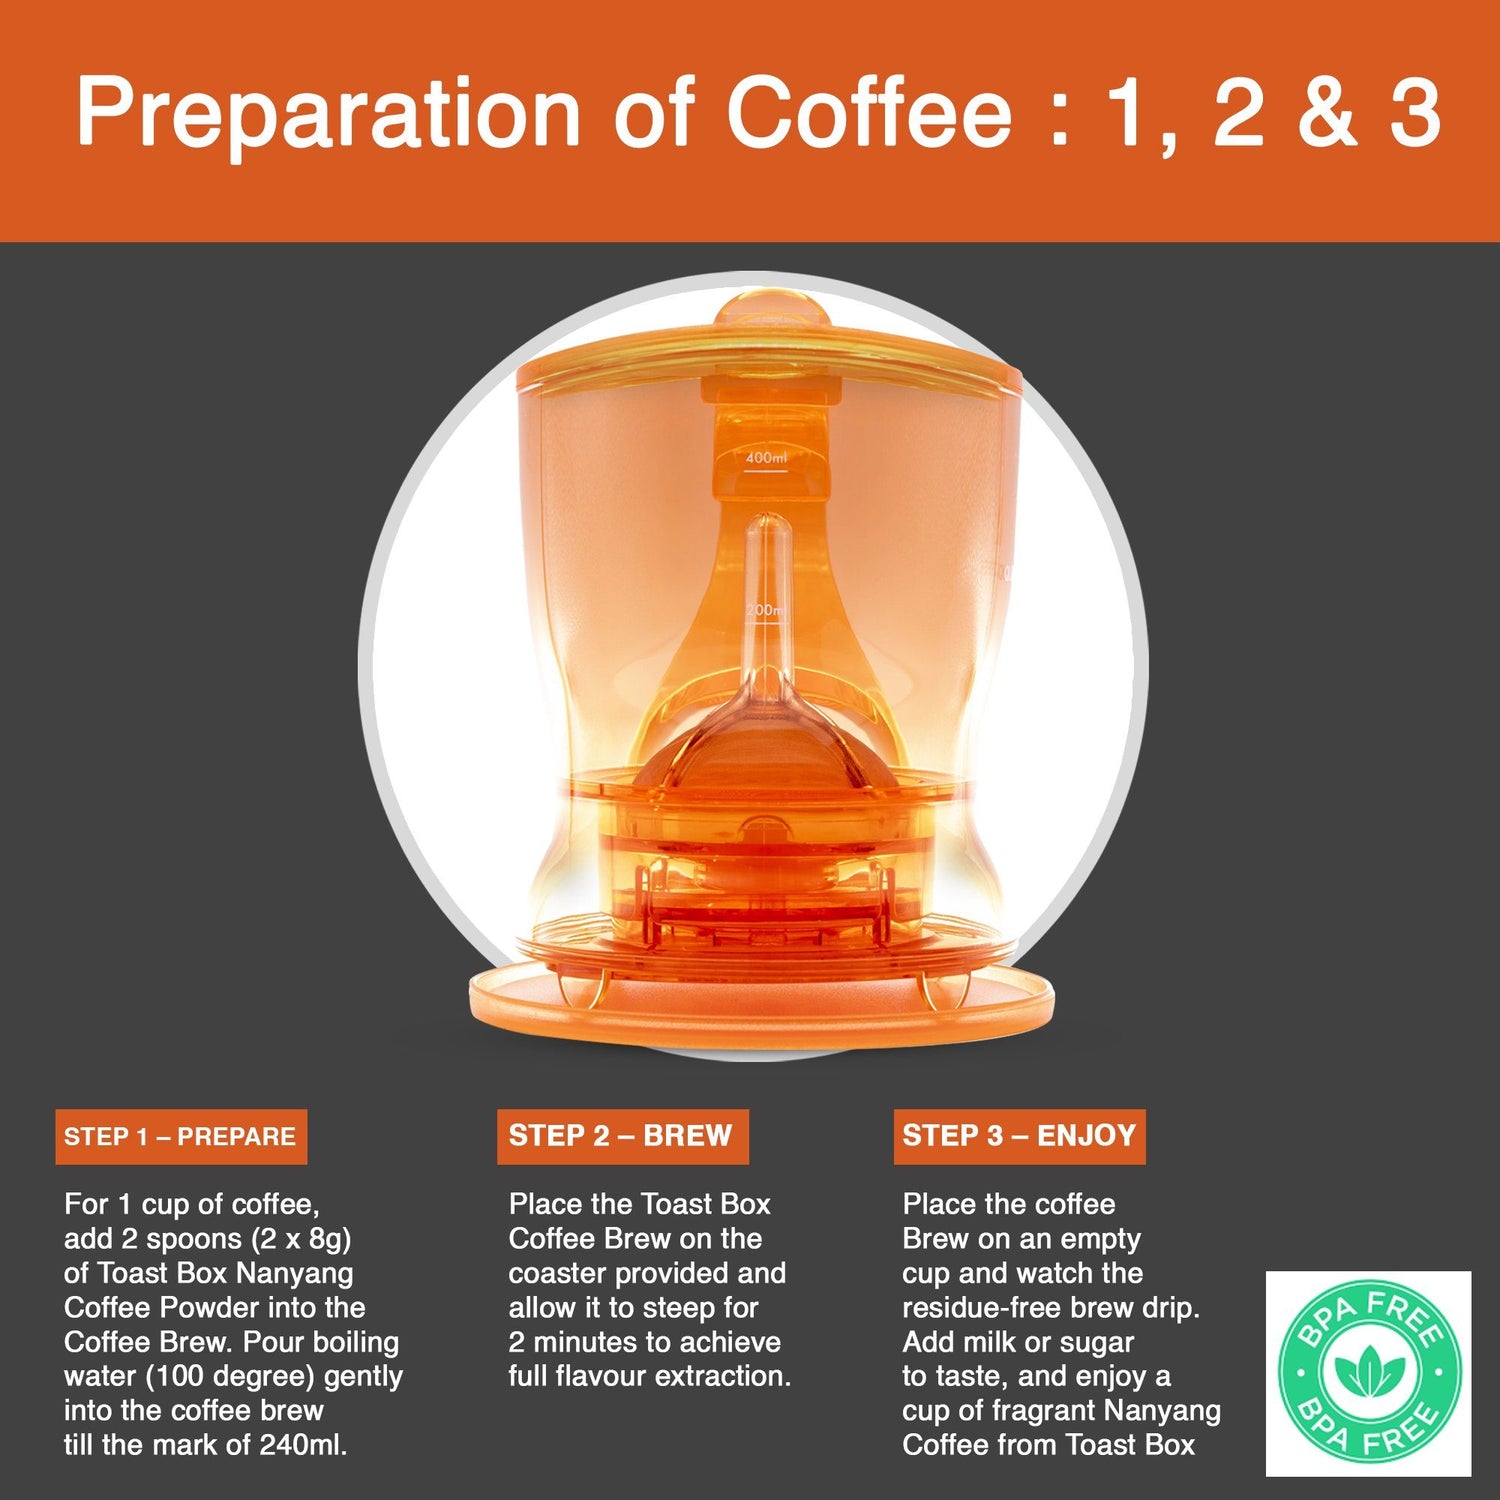 [Queen's Coffee] Coffee Brewer Orange (BPA Free - Tested by SGS) From Taiwan - Bloom Concept